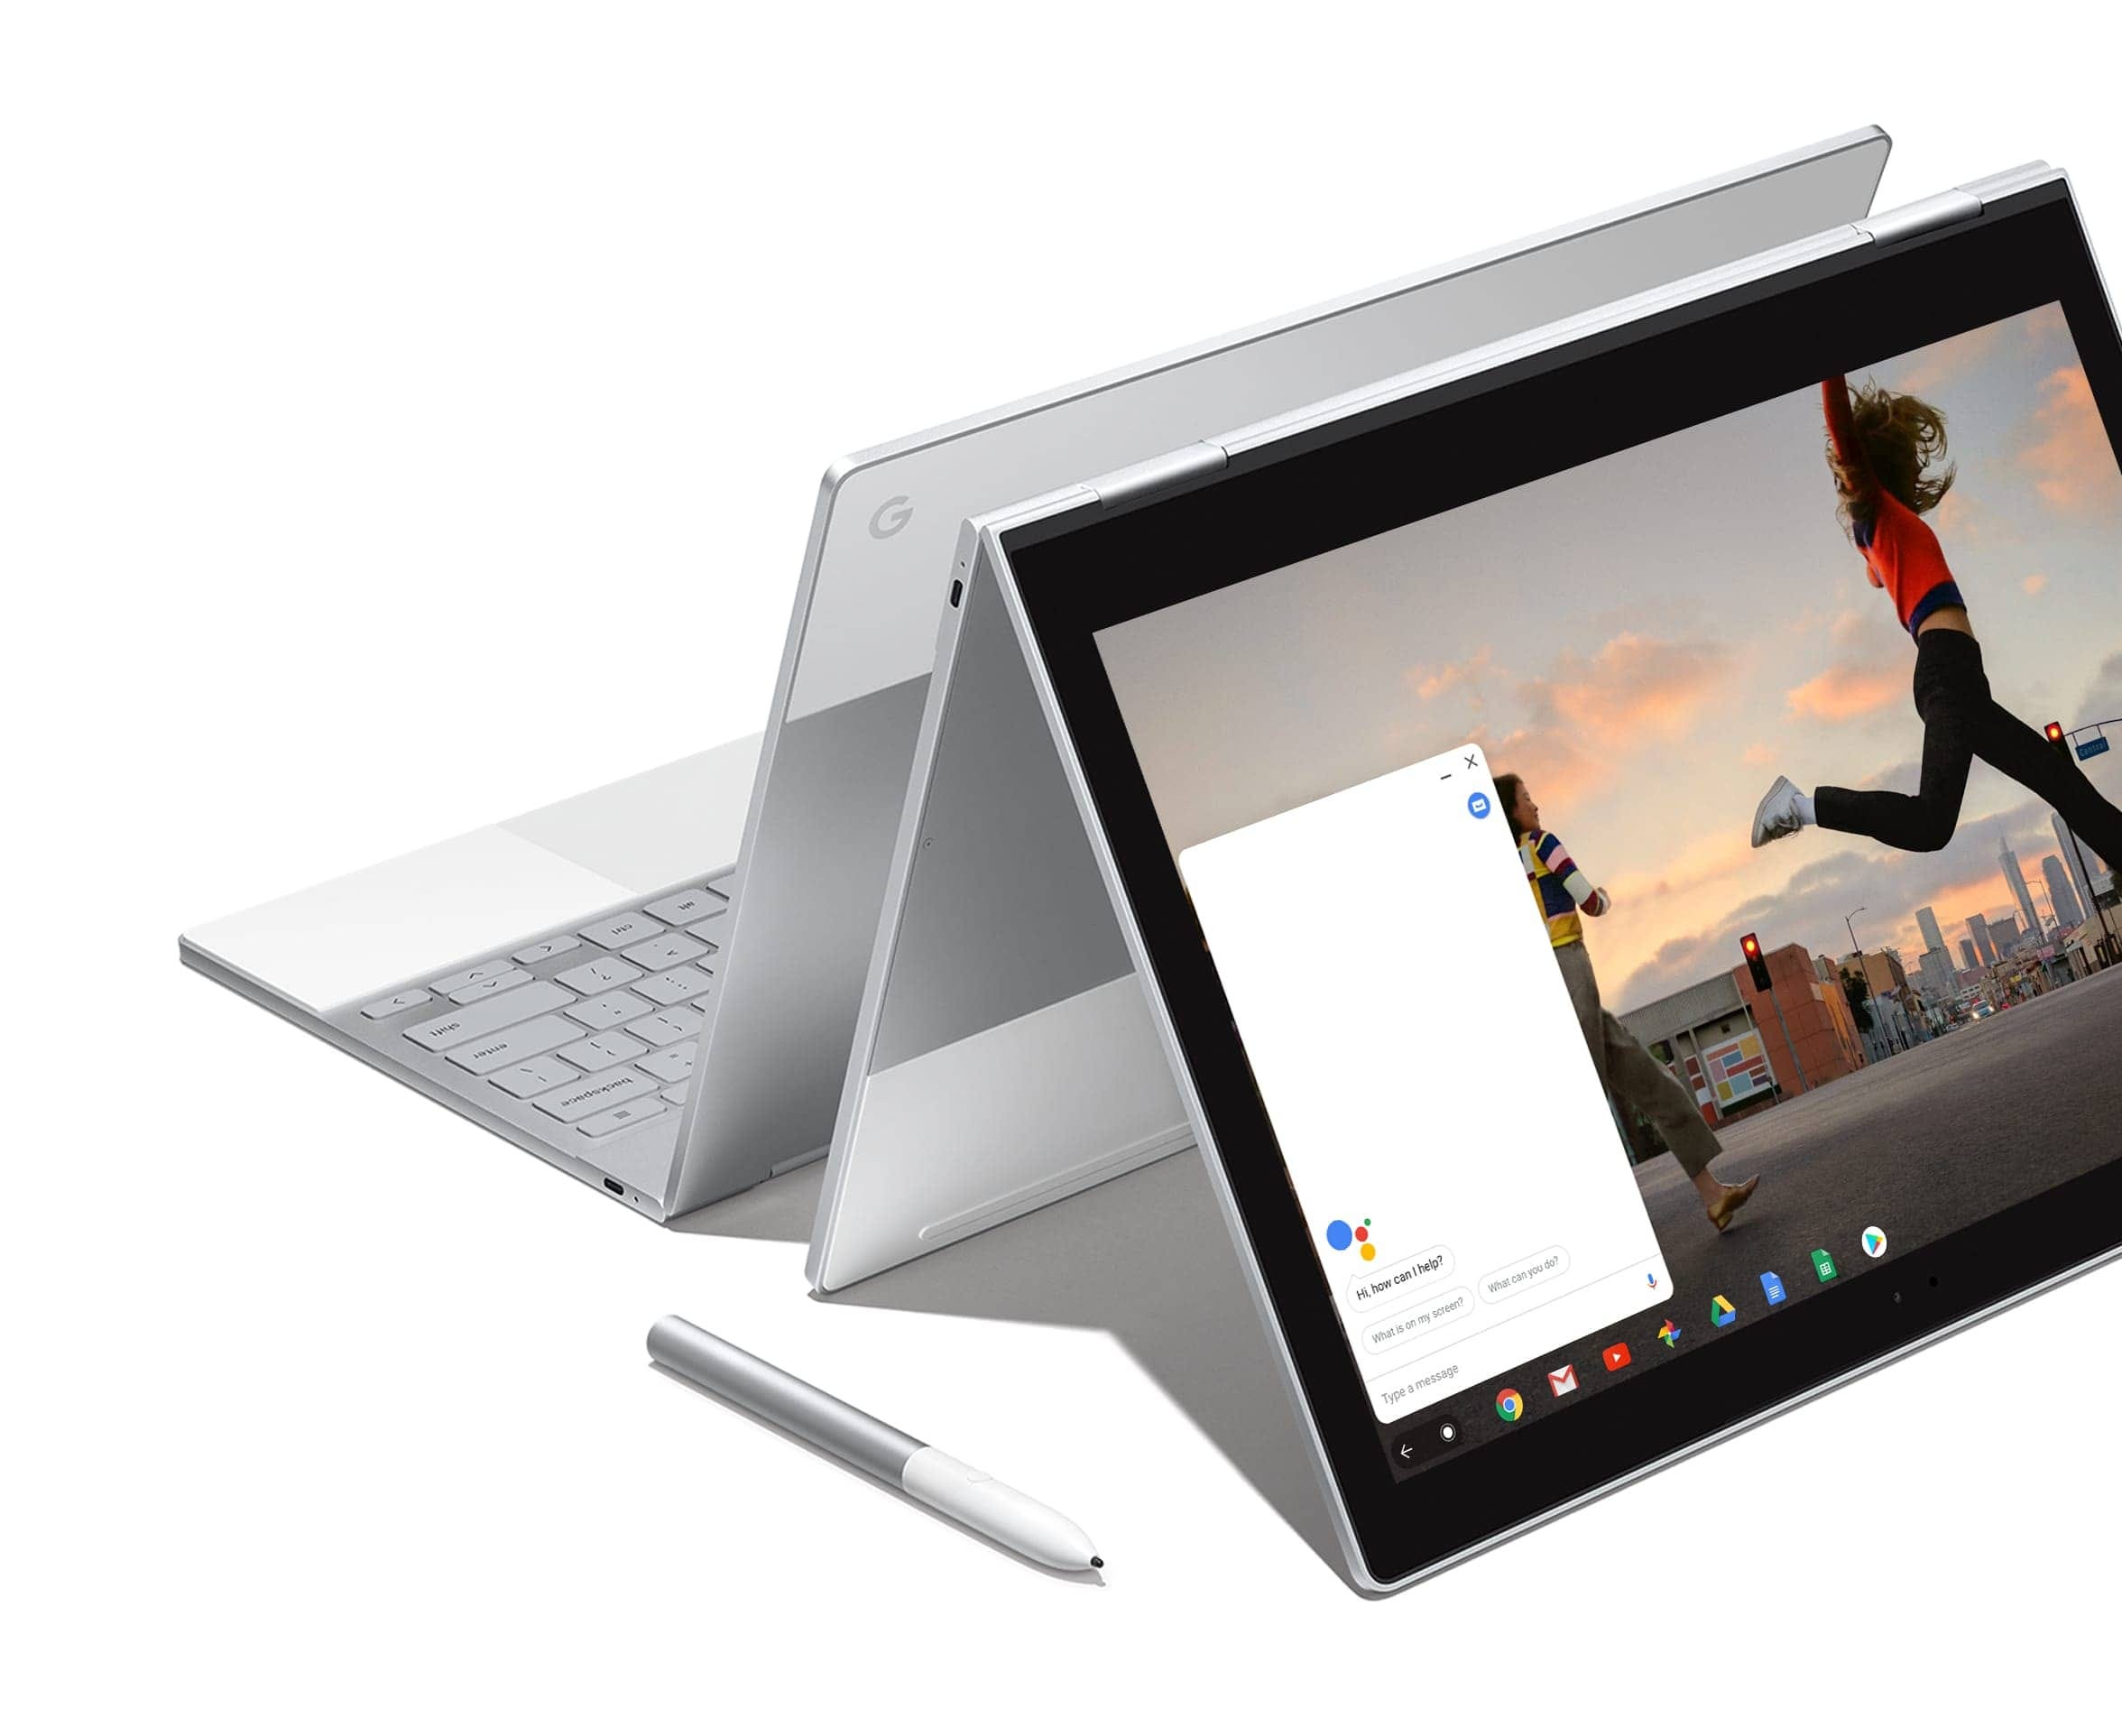 Google Wants the Chromebook to Be the Future of Computing